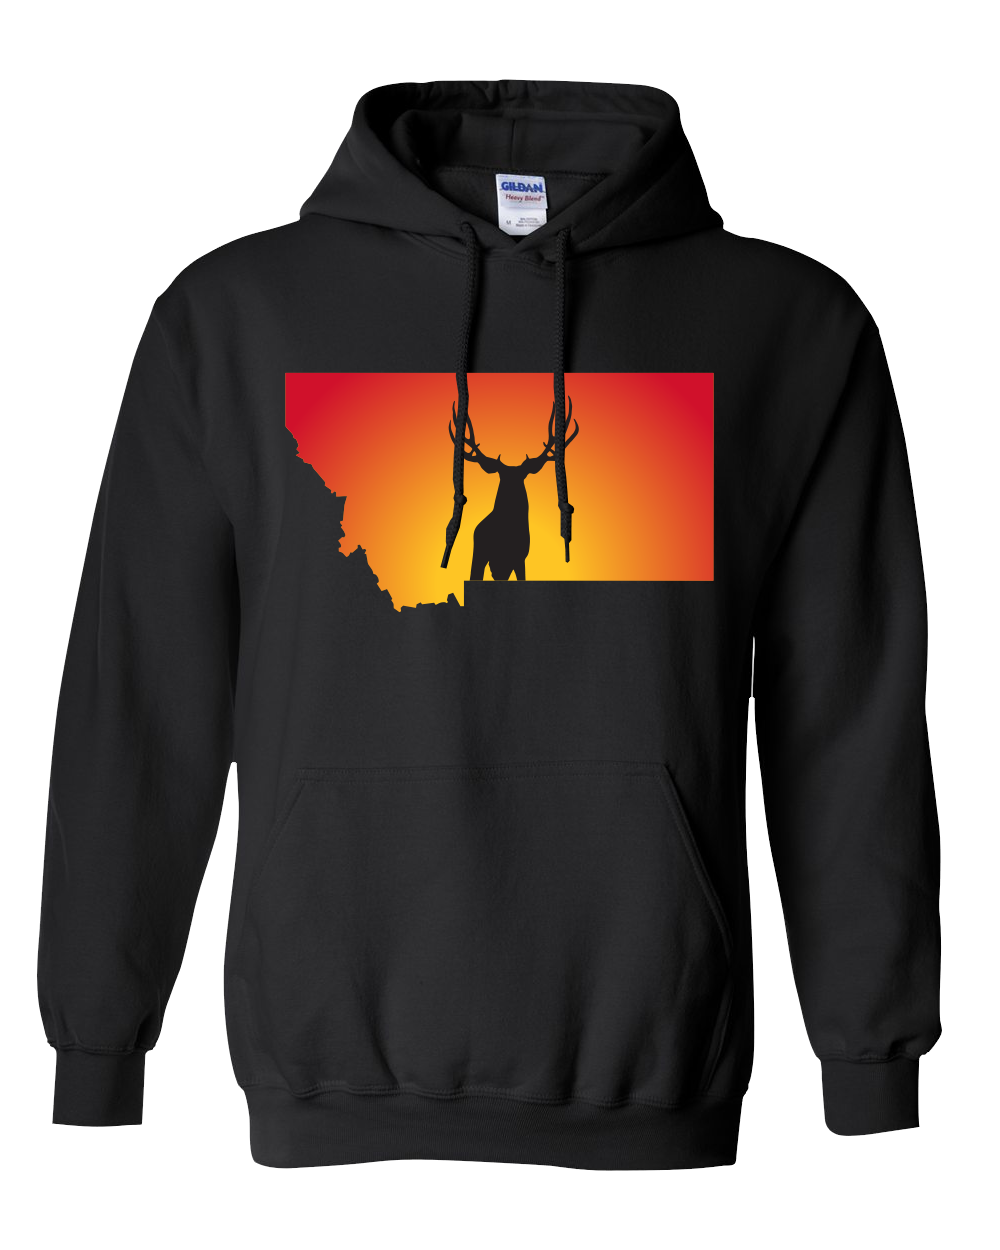 Pullover Hooded Sweatshirt Montana Black Mule Deer Vibrant Design High Quality Tight Knit Ring Spun Low Maintenance Cotton Printed With The Newest Available Color Transfer Technology